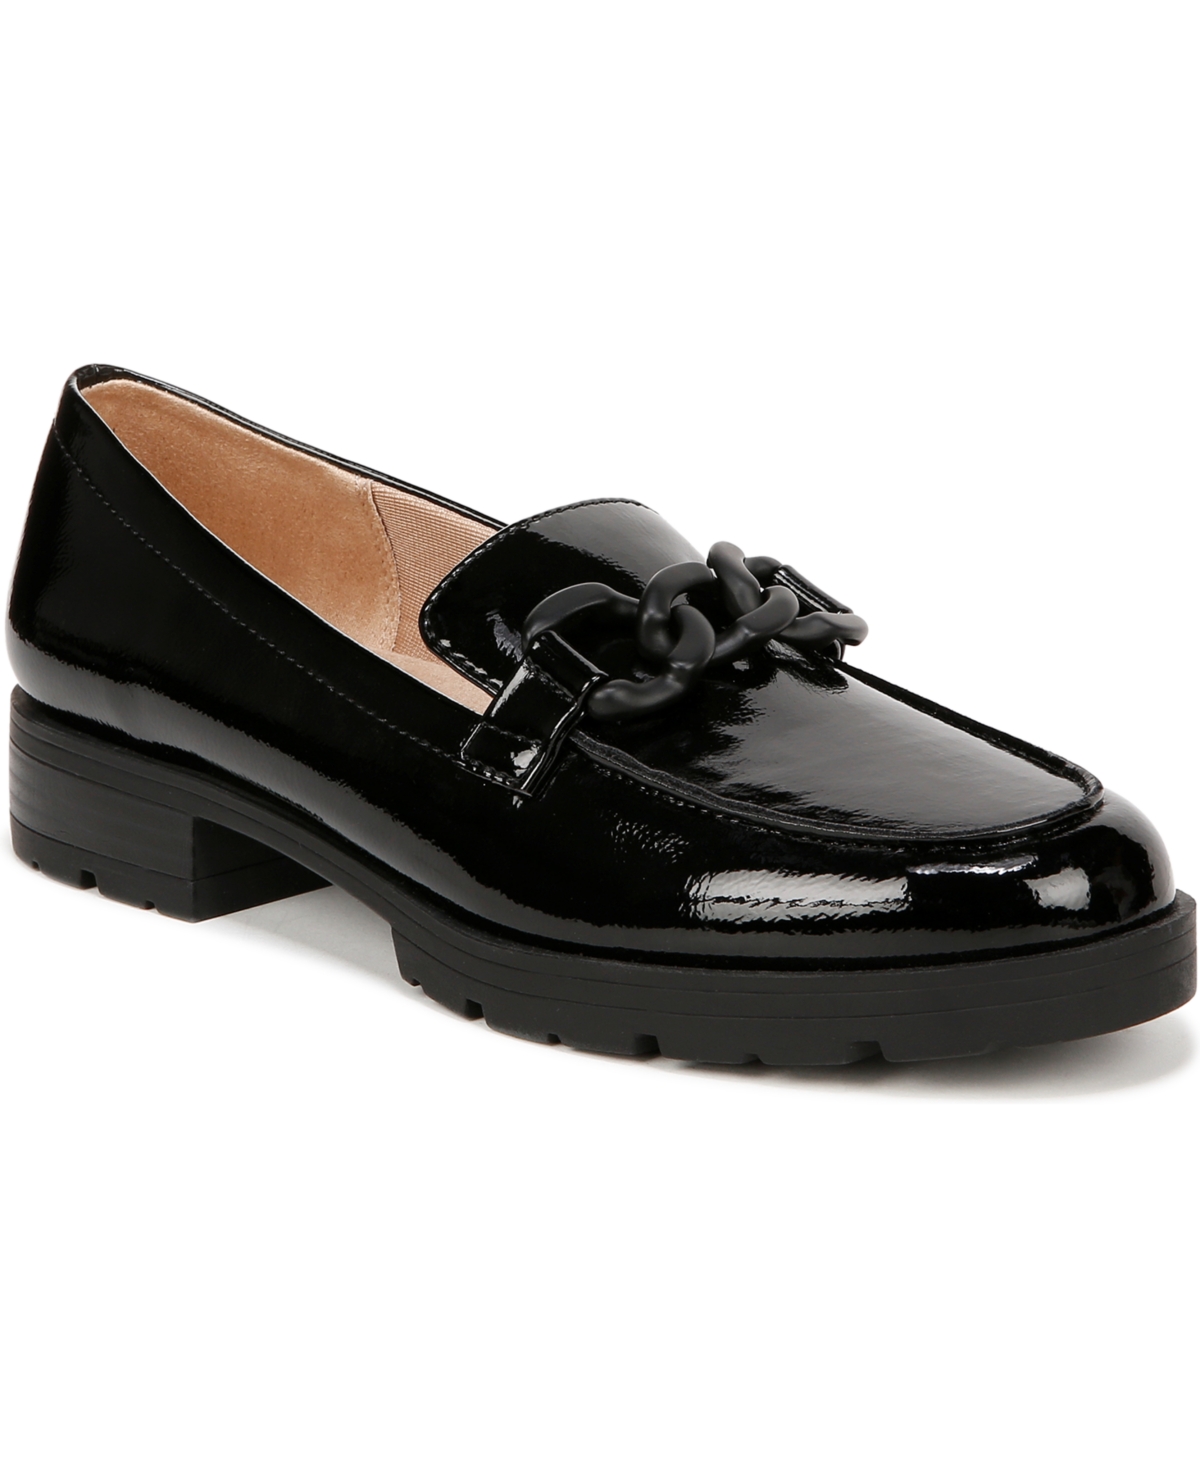 Lifestride London 2 Loafers In Black Faux Patent